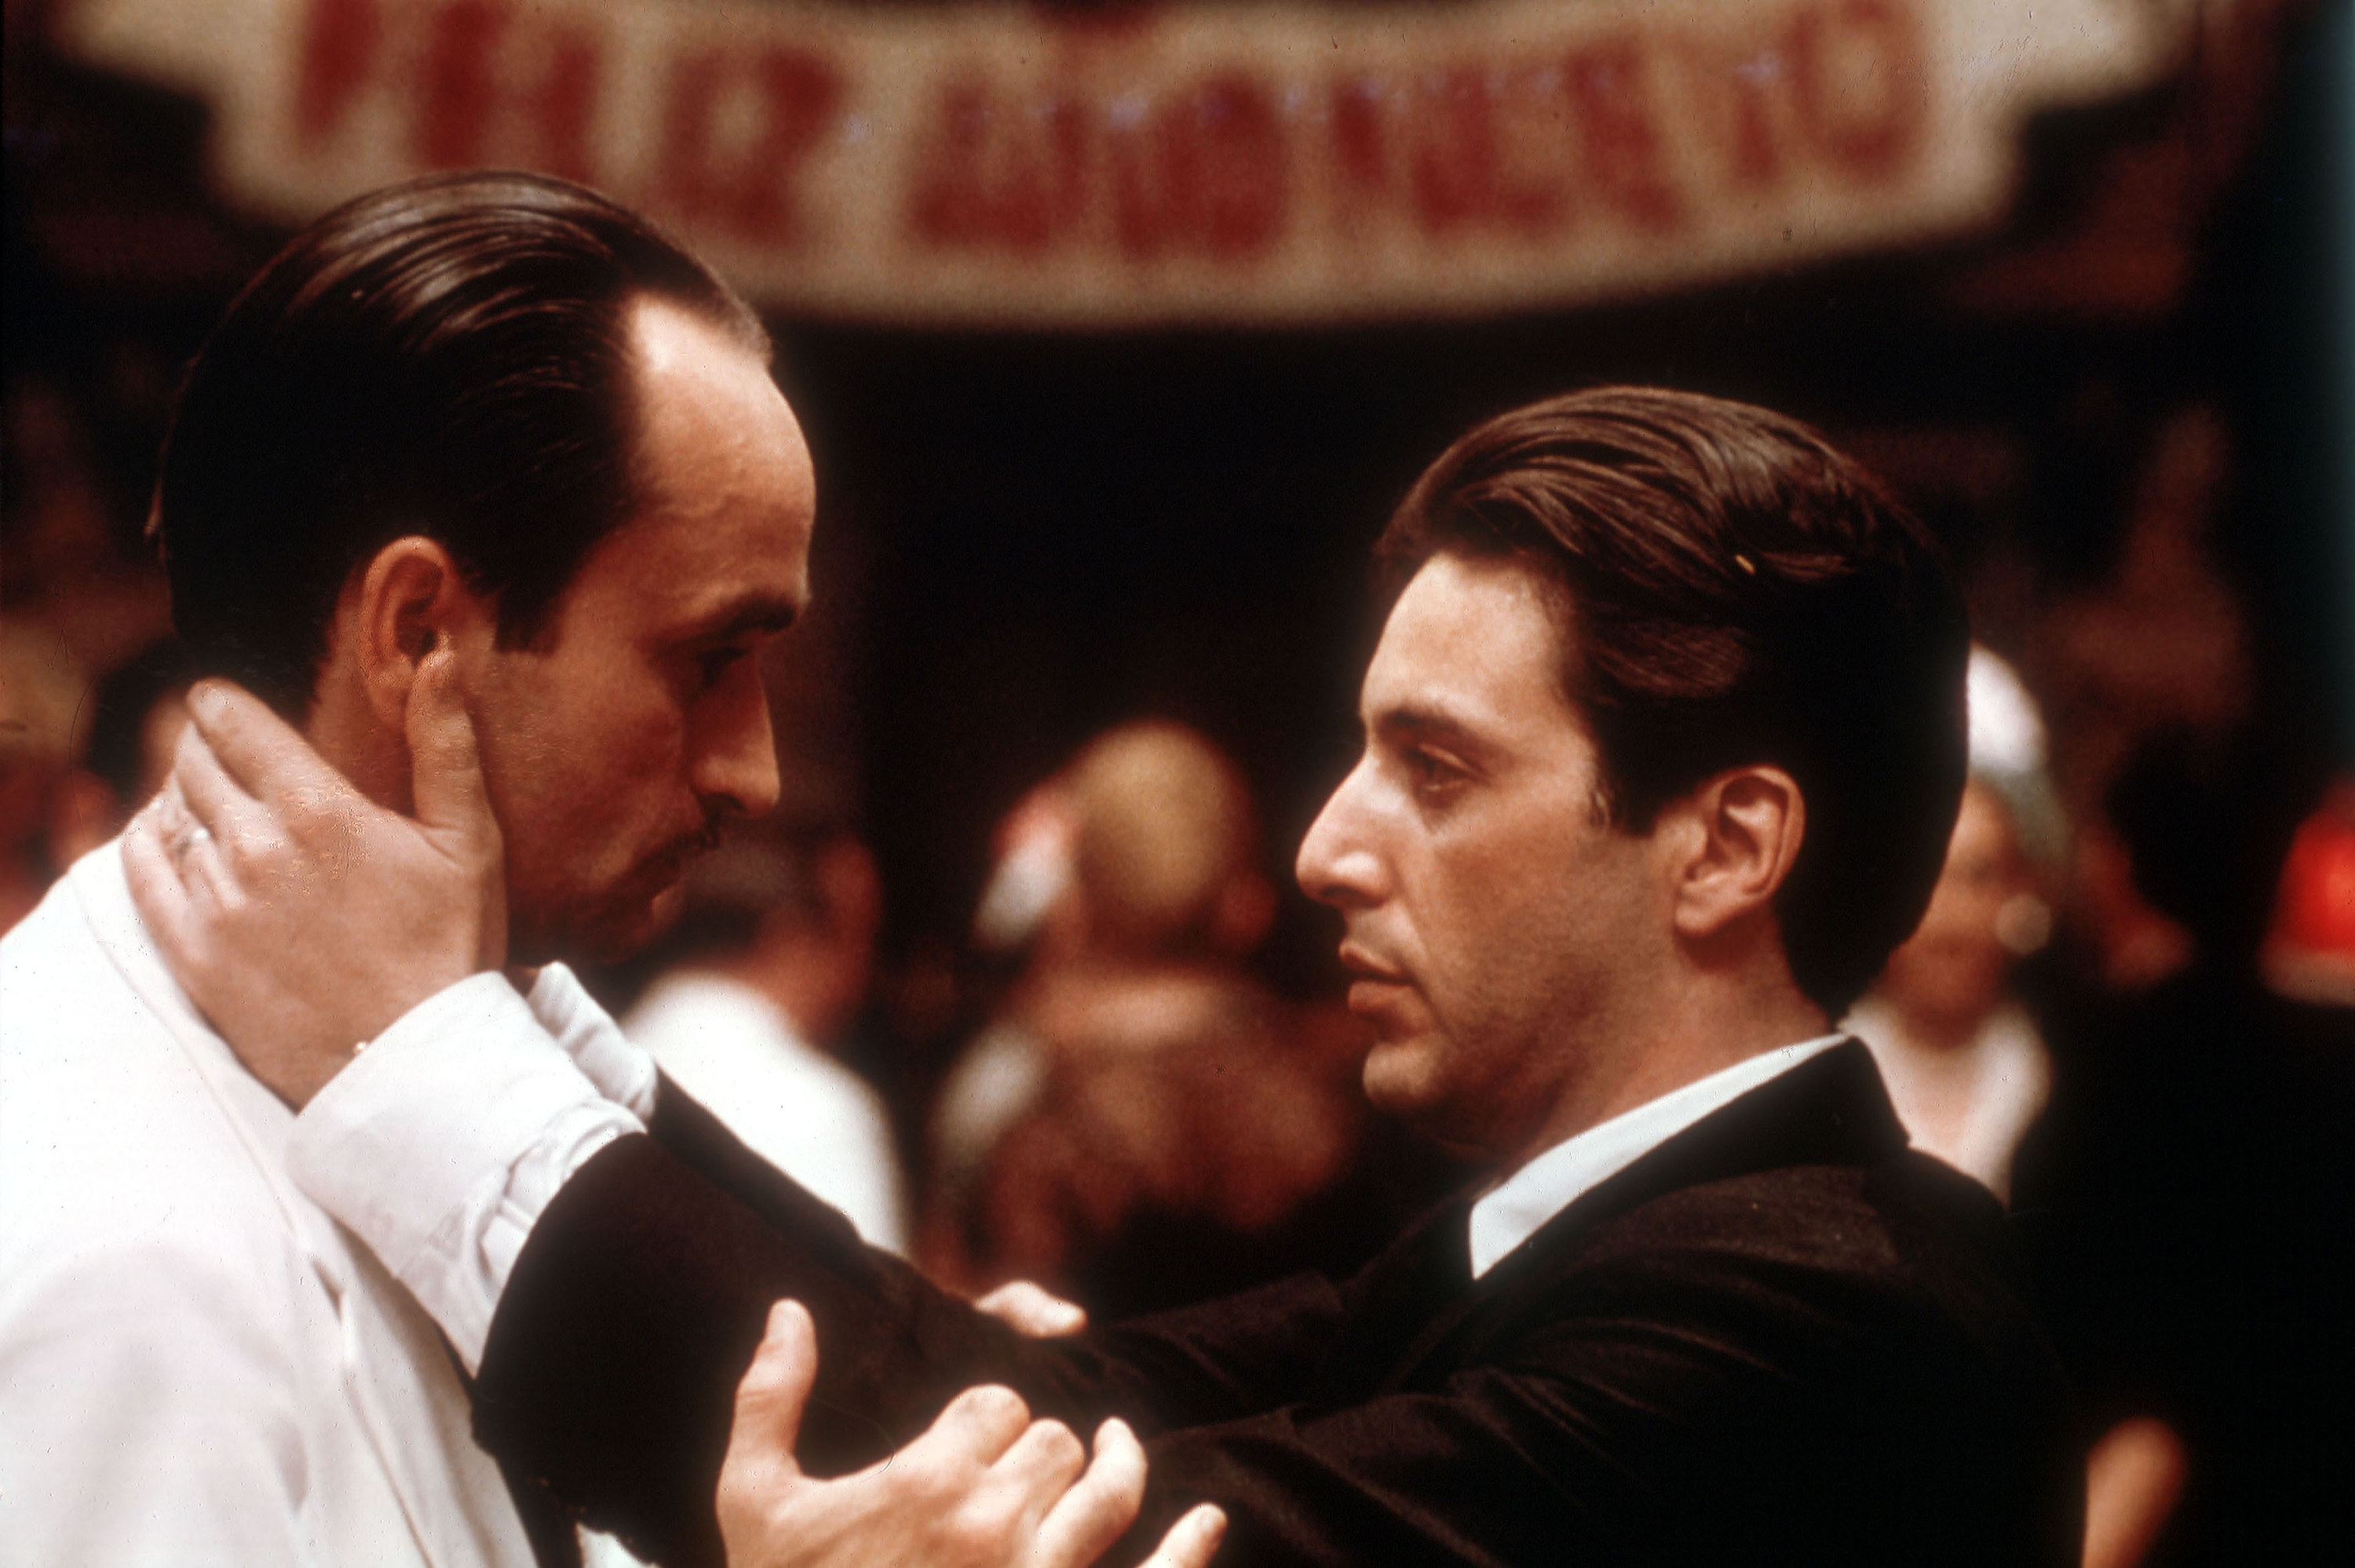 Al Pacino as Michael holds John Cazale as Fredo by the neck at a crowded upscale party